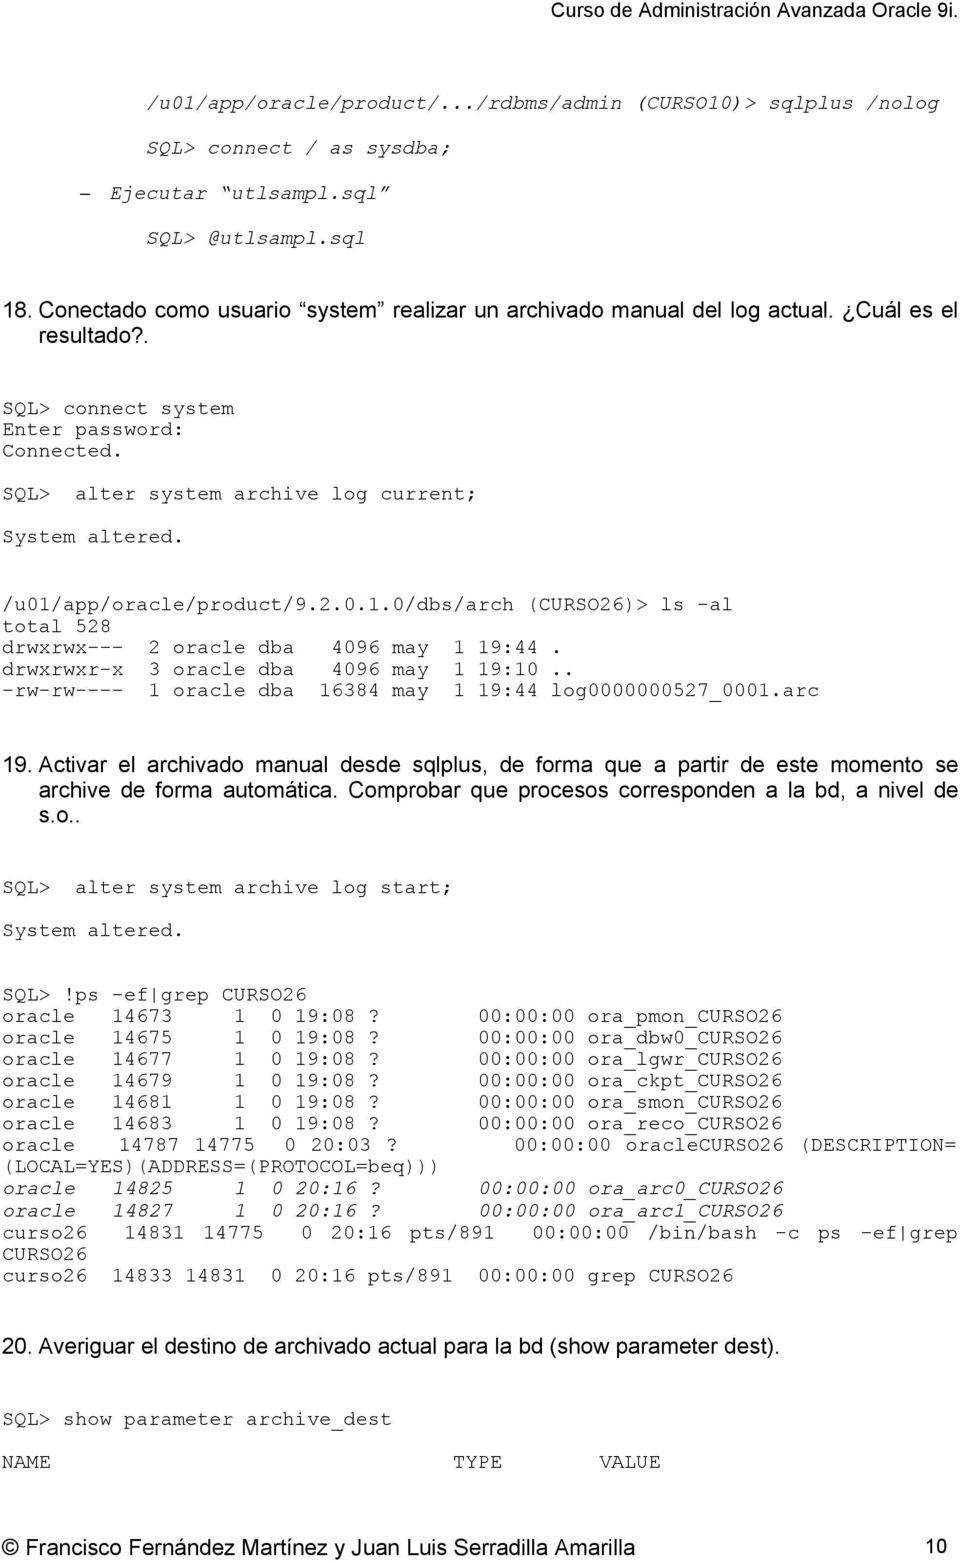 SQL> alter system archive log current; /u01/app/oracle/product/9.2.0.1.0/dbs/arch (CURSO26)> ls -al total 528 drwxrwx--- 2 oracle dba 4096 may 1 19:44. drwxrwxr-x 3 oracle dba 4096 may 1 19:10.